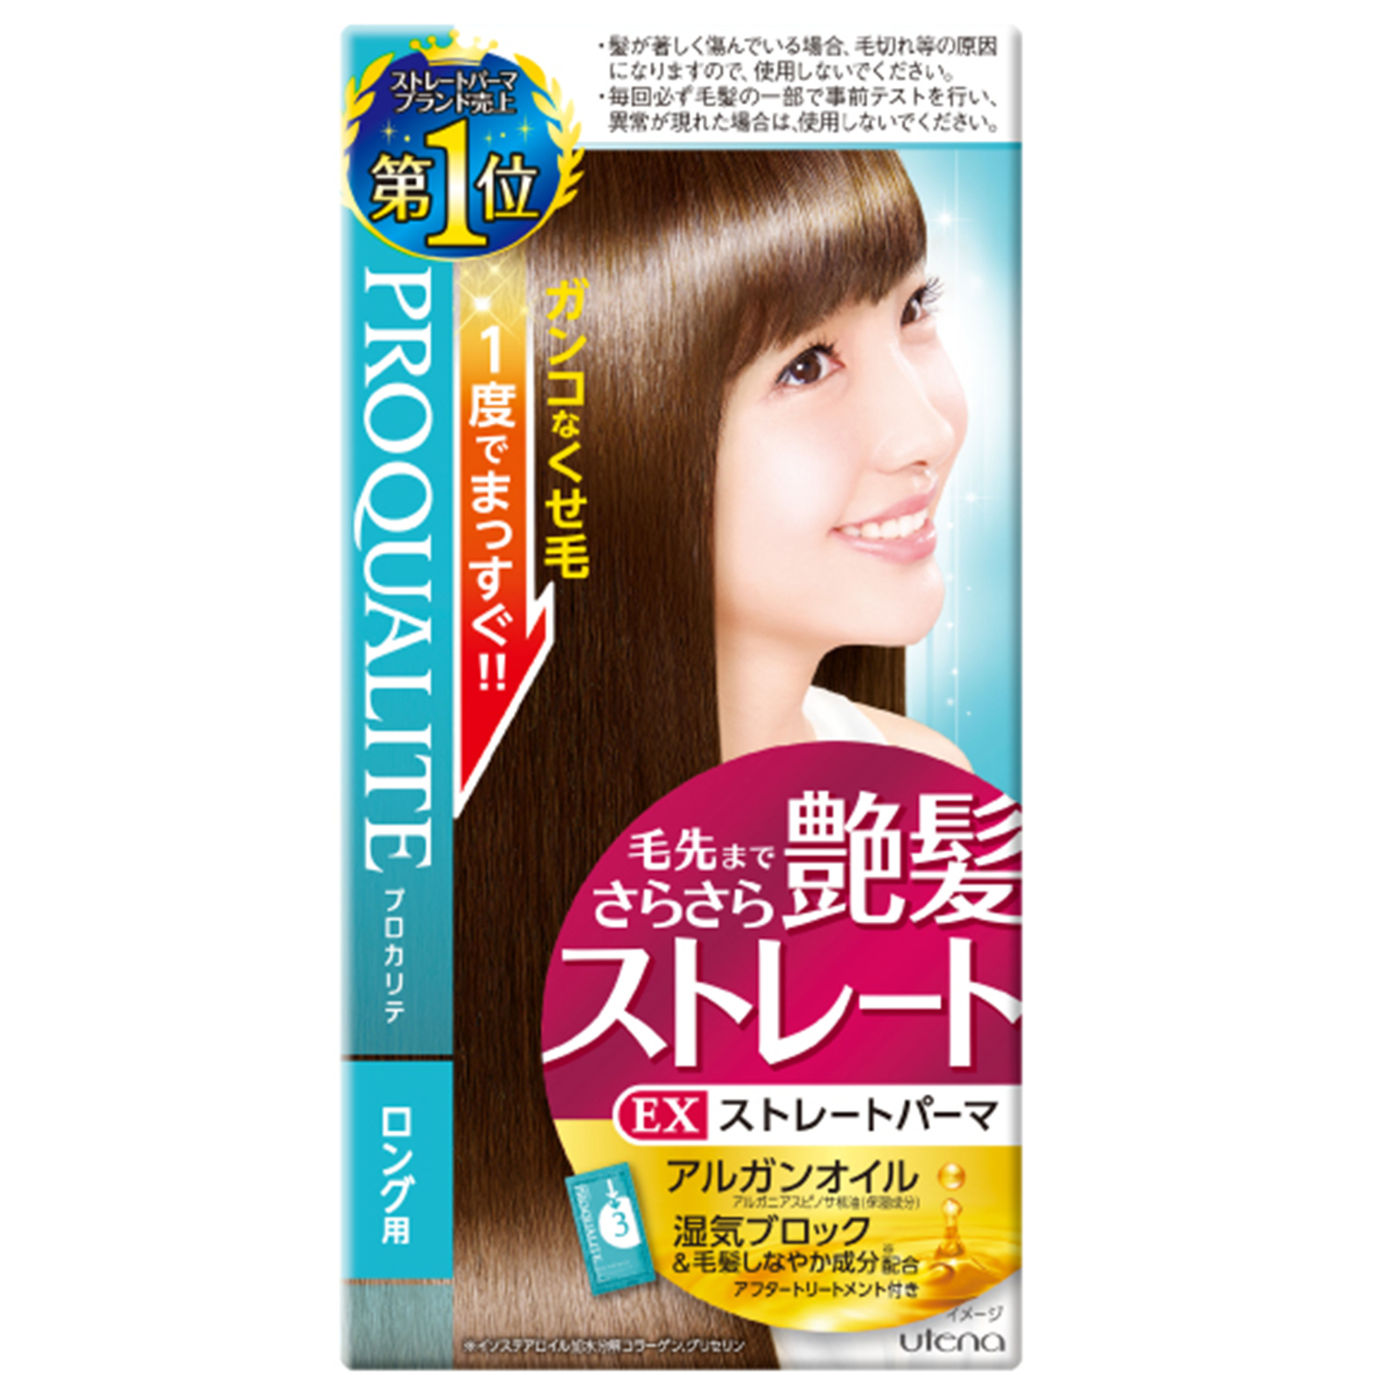 Utena PROQUALITE EX Straight Perm For Long - Harajuku Culture Japan - Japanease Products Store Beauty and Stationery